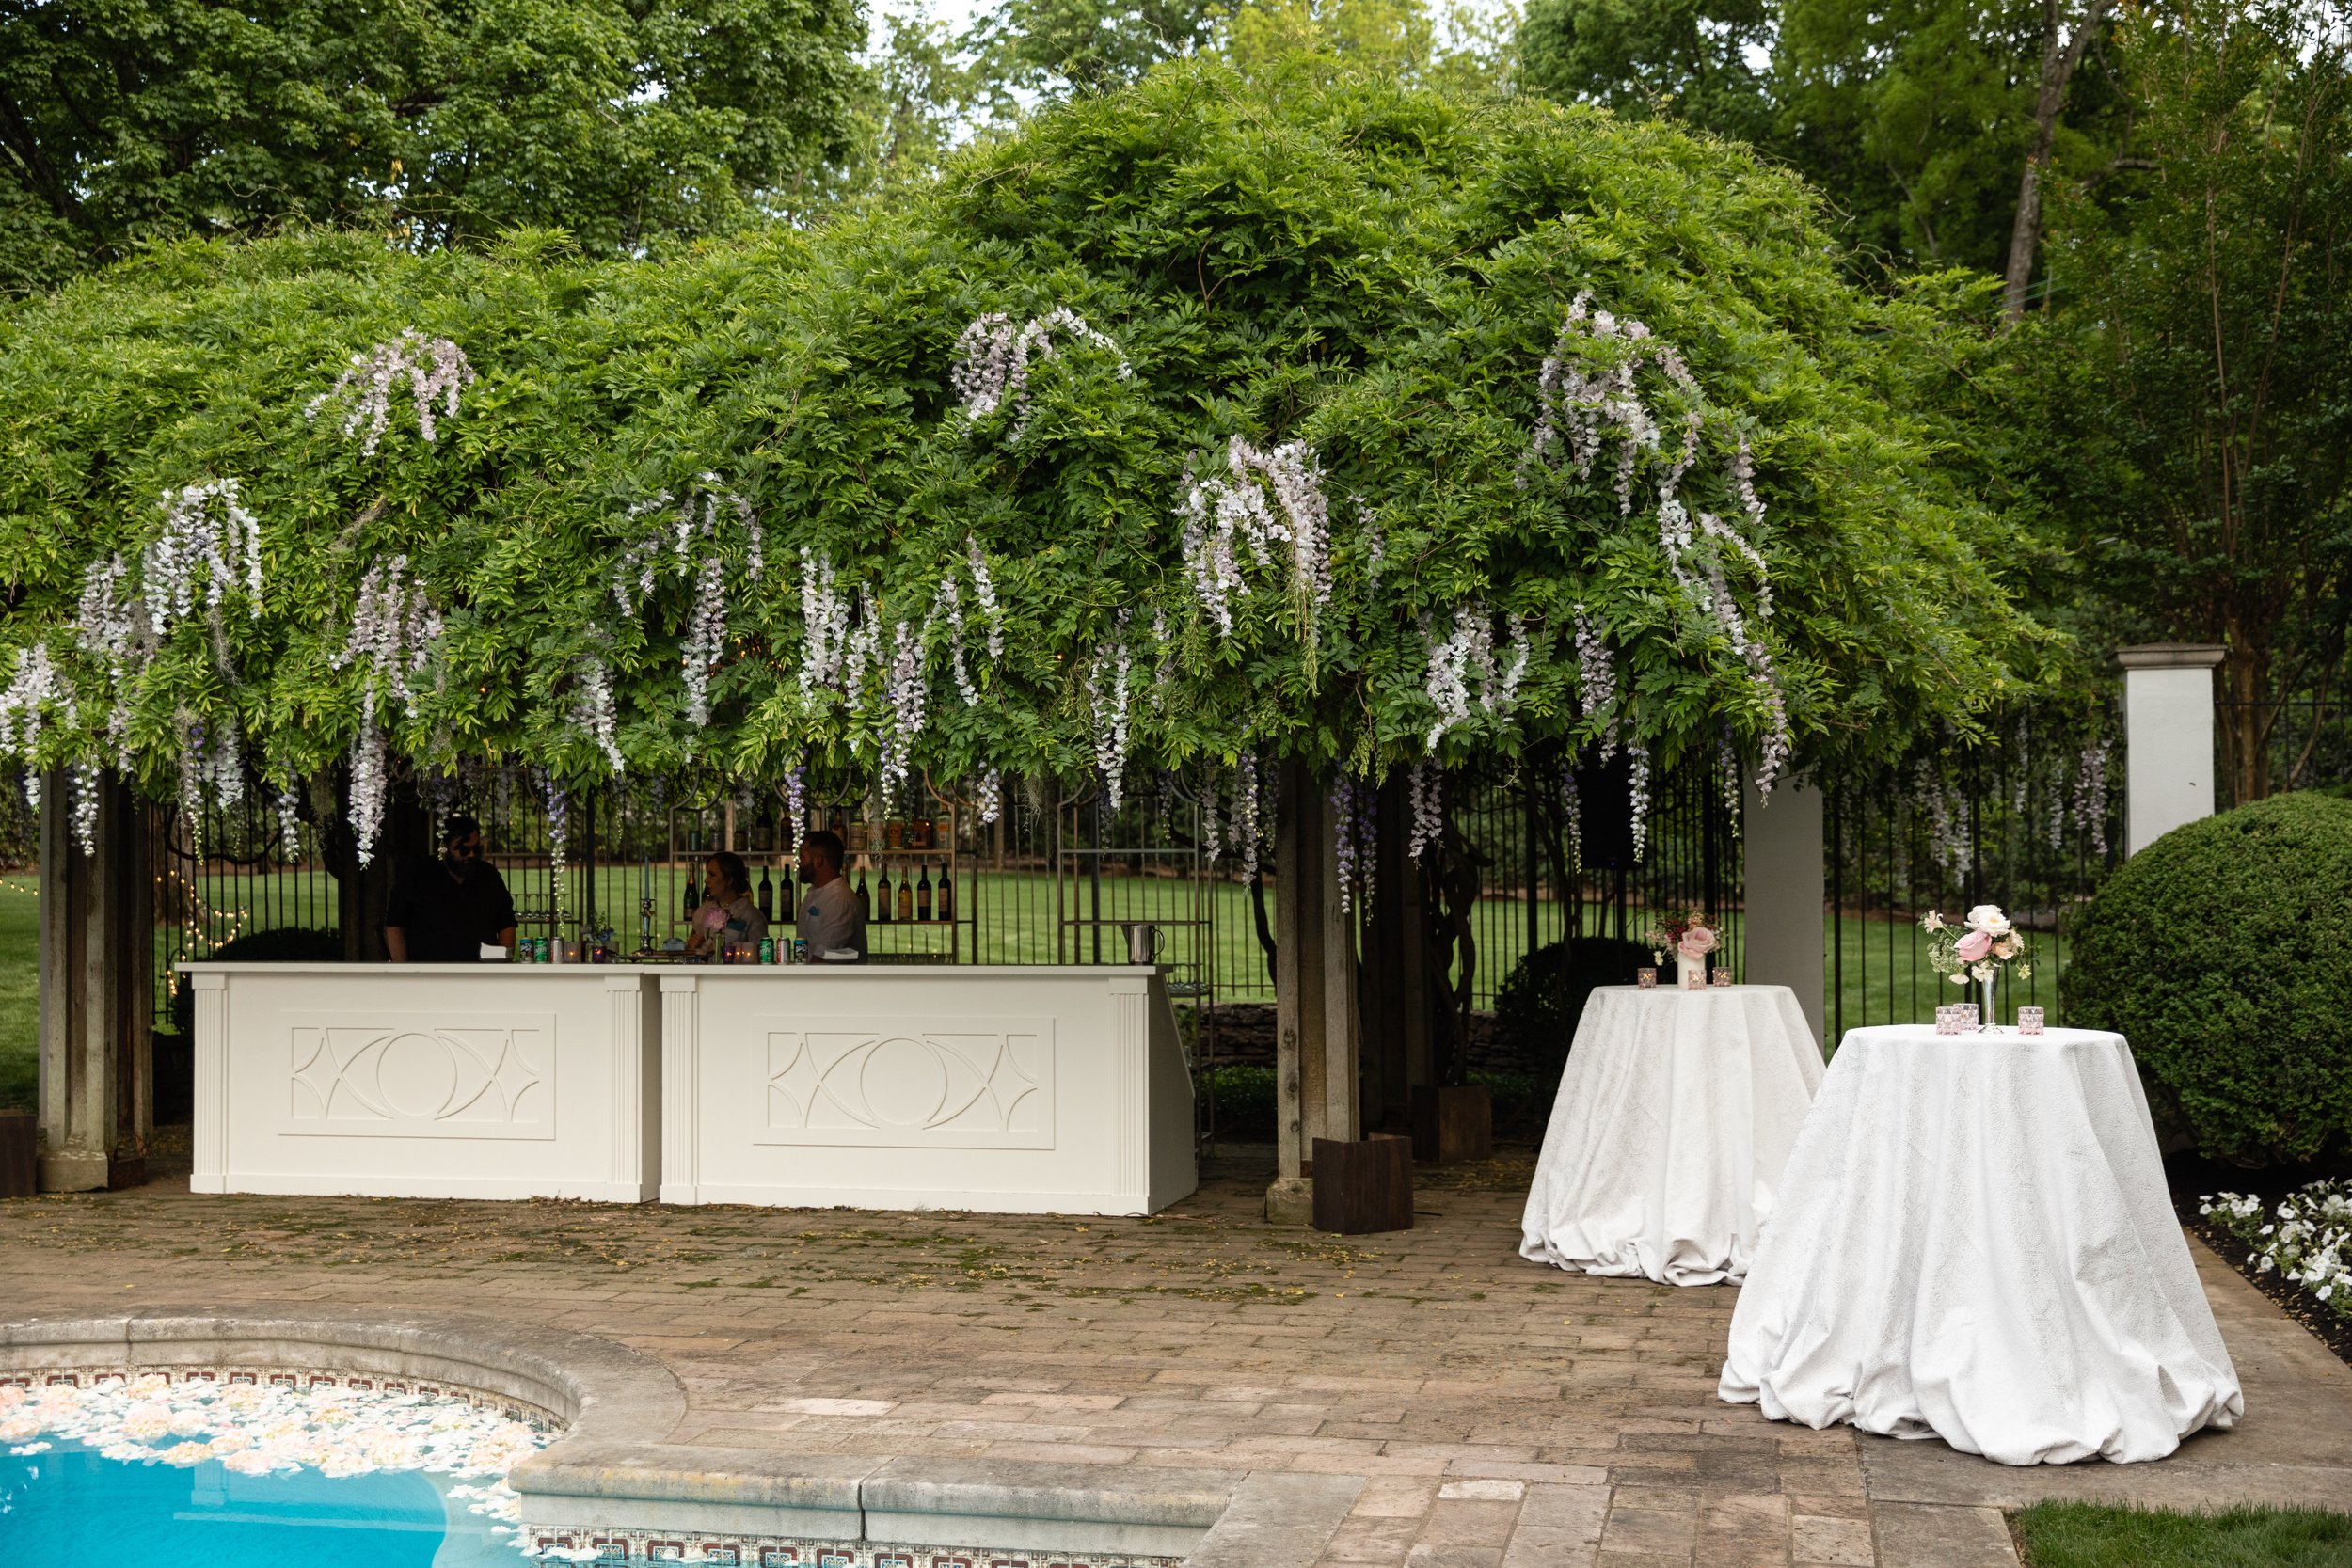 Bridgerton inspired engagement party at a private home in Nashville, TN with pastel candles and flowers floating in the pool with wisteria and delphinium growing over the bar. Nashville wedding floral designer, Rosemary & Finch.